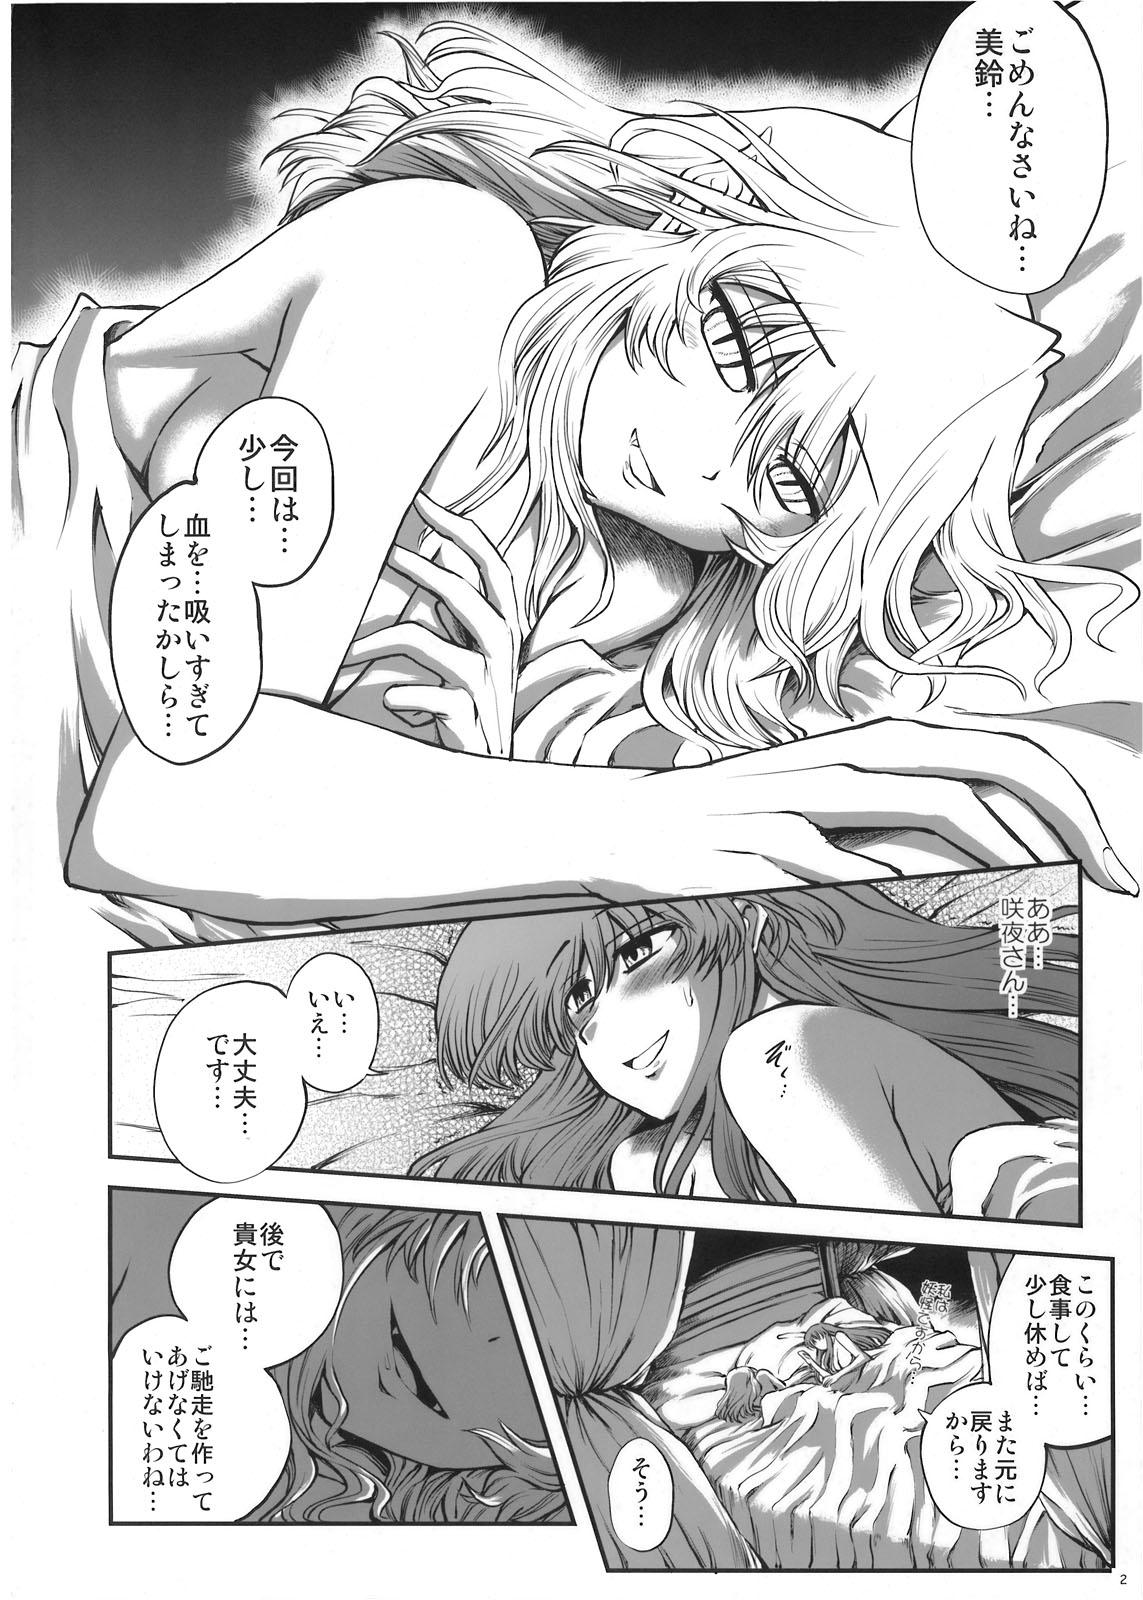 Guy Luna Dial Maid to Chi no Unmei dokei Lunatic+alpha - Touhou project Housewife - Page 3